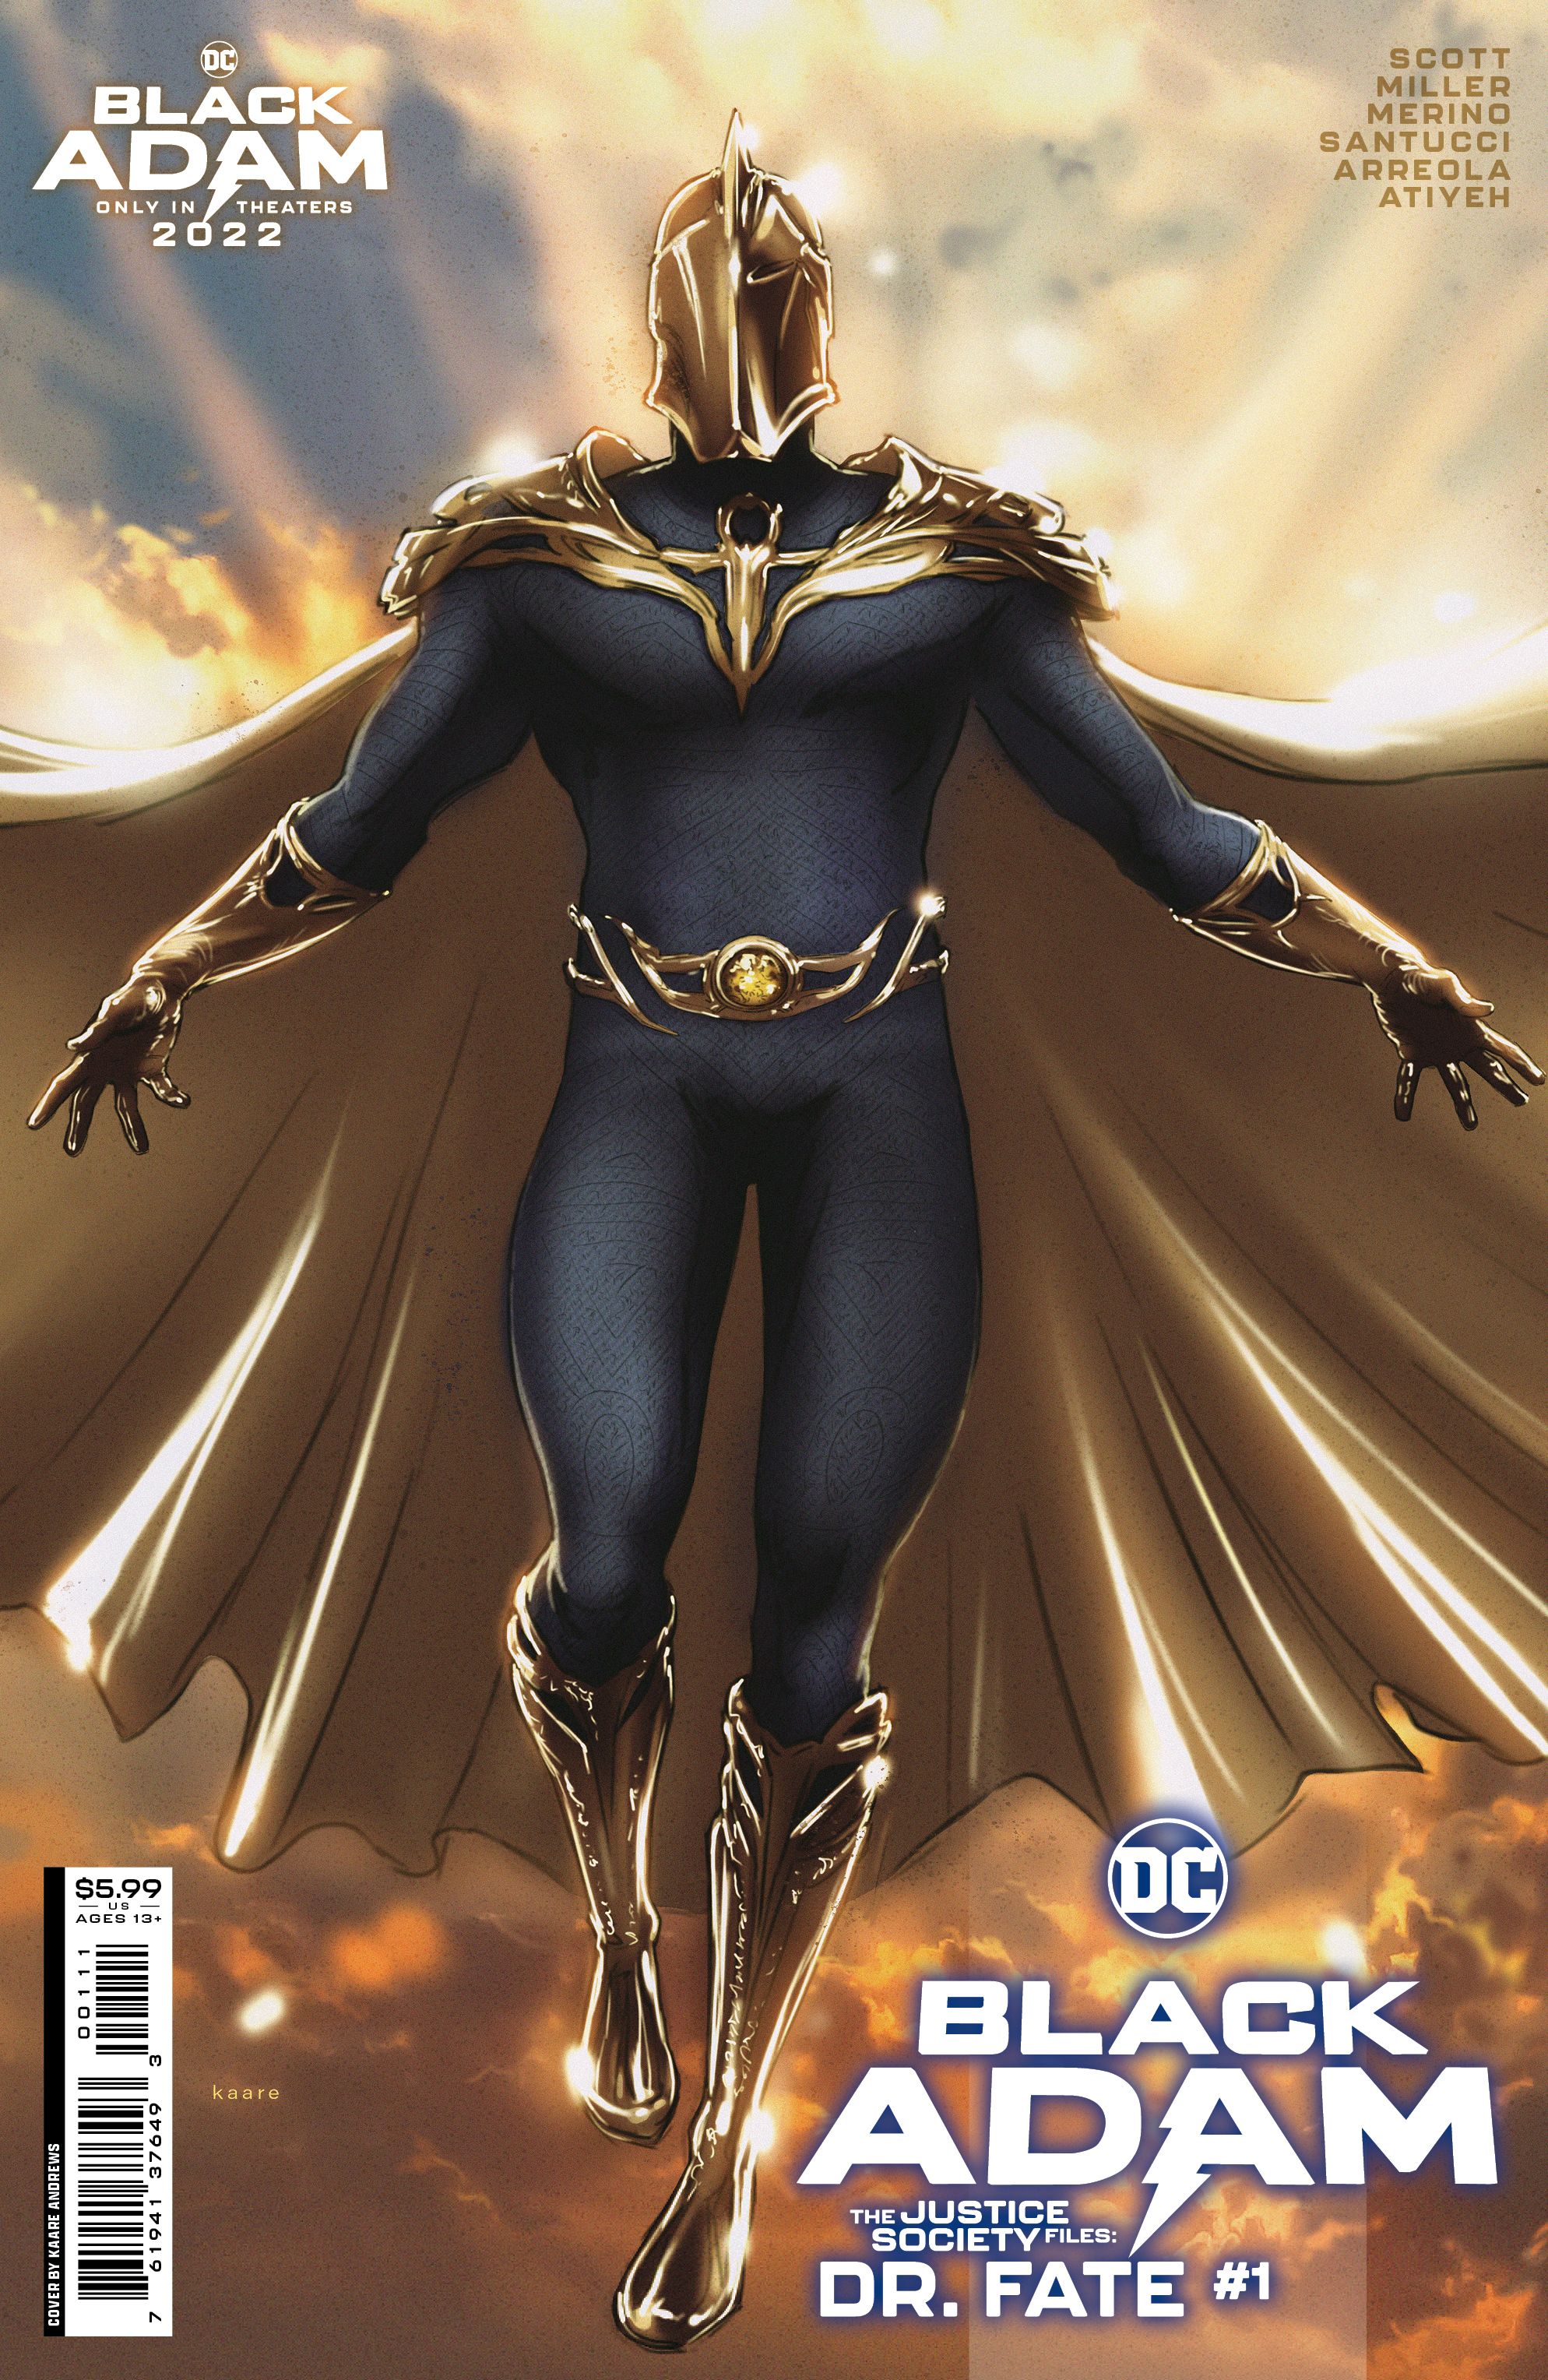 Black Adam: The Justice Society Files - Doctor Fate #1 Comic